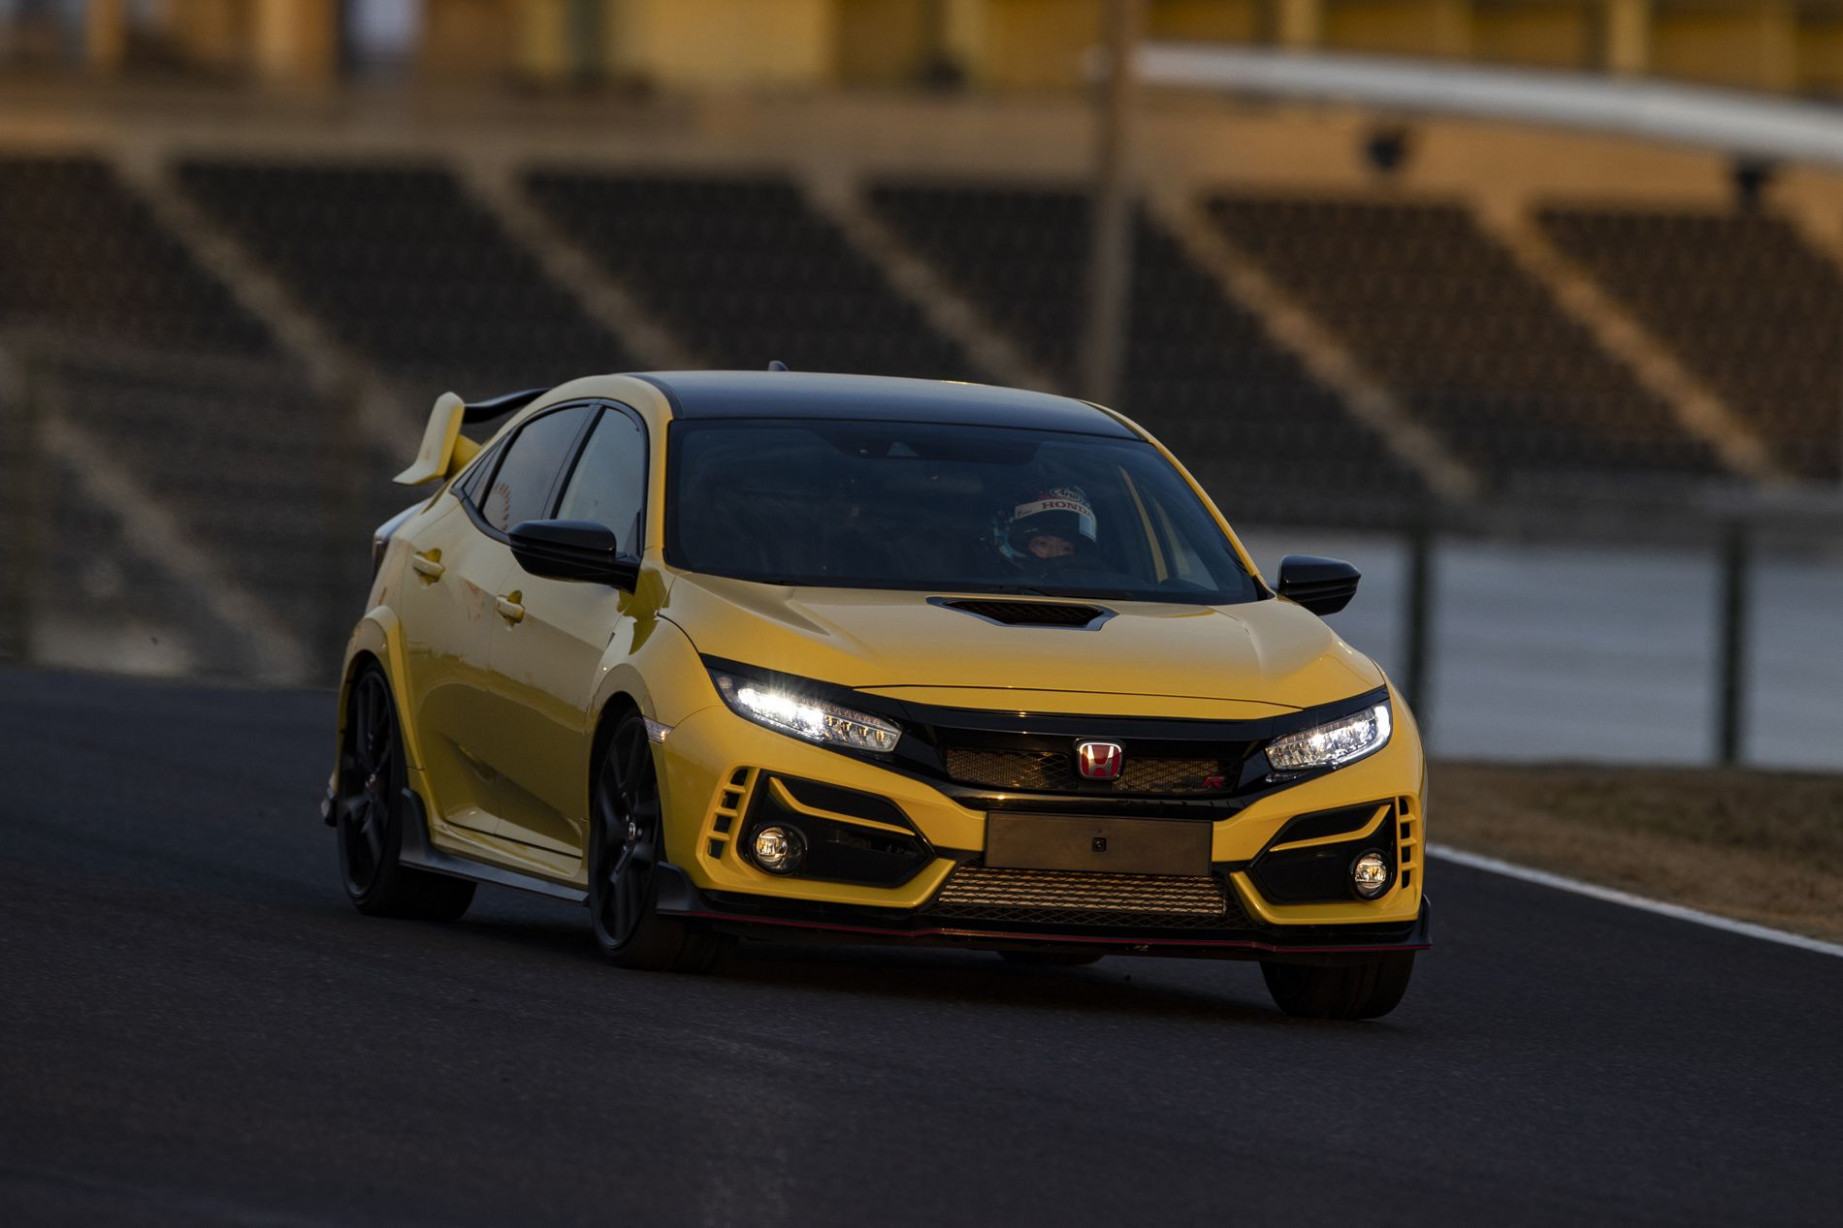 New Concept how fast is a honda civic type r